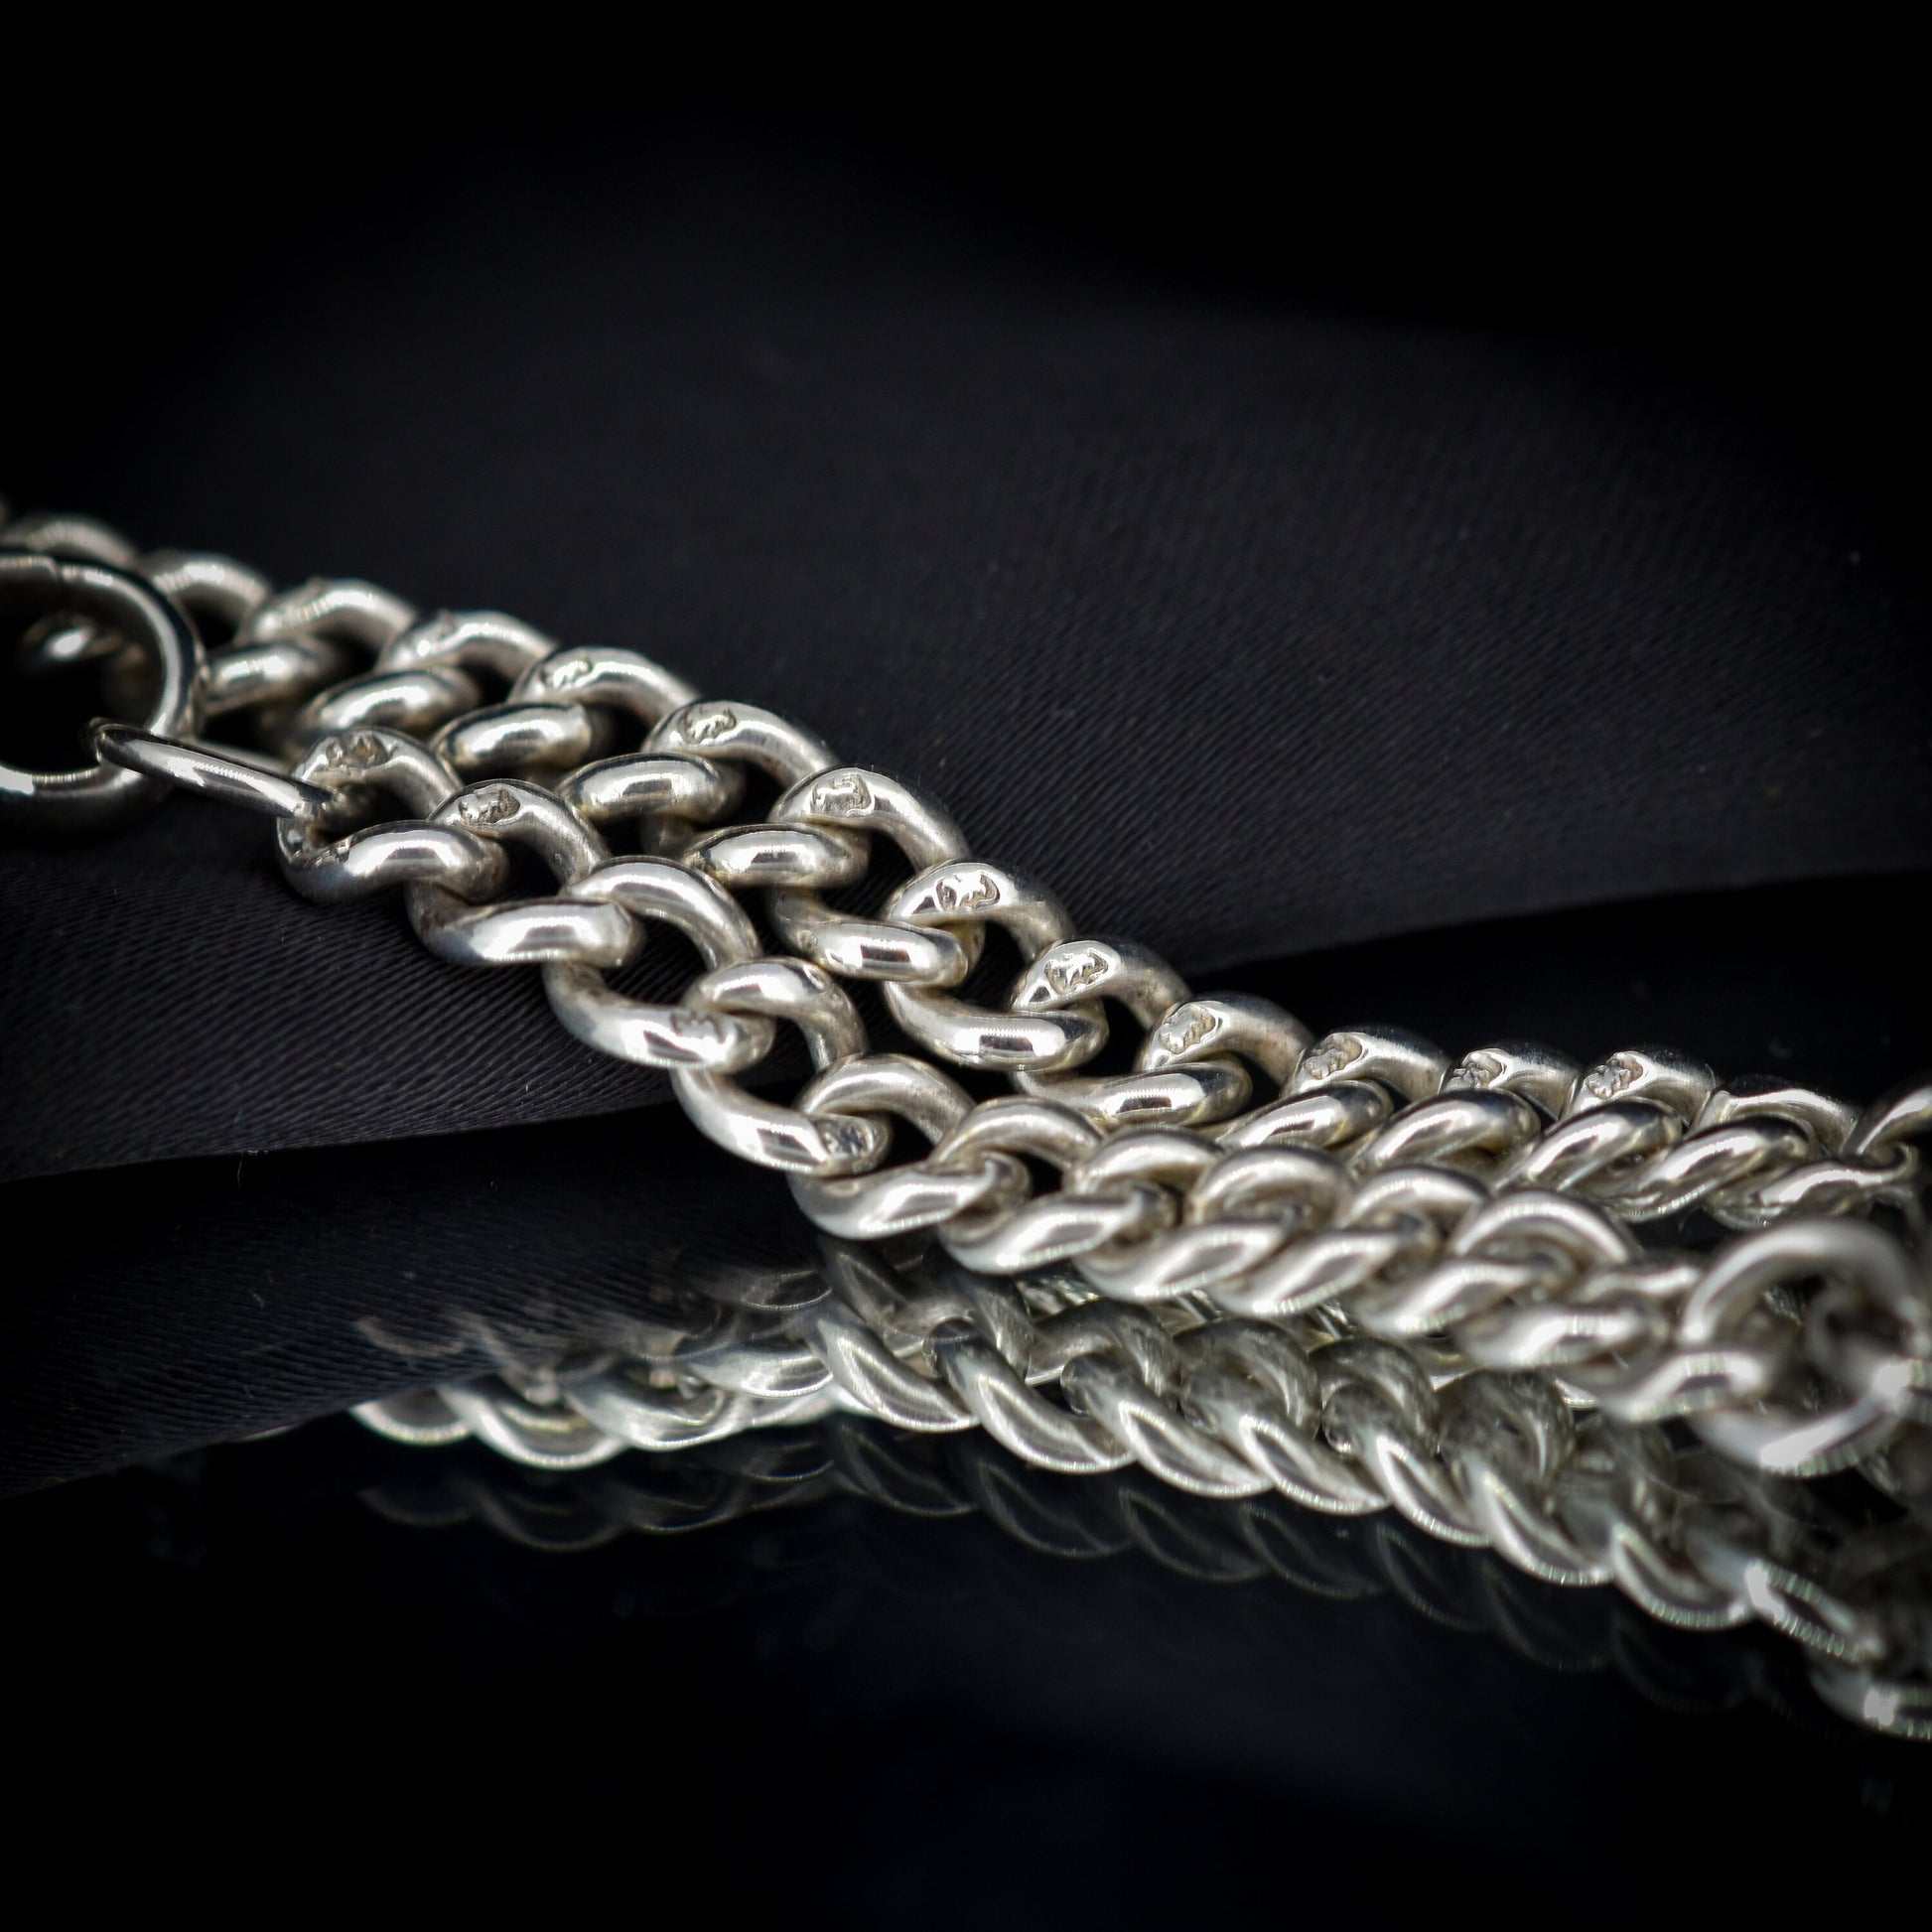 13" Antique Sterling Silver Curb Albert Watch Chain Necklace, 30.4g